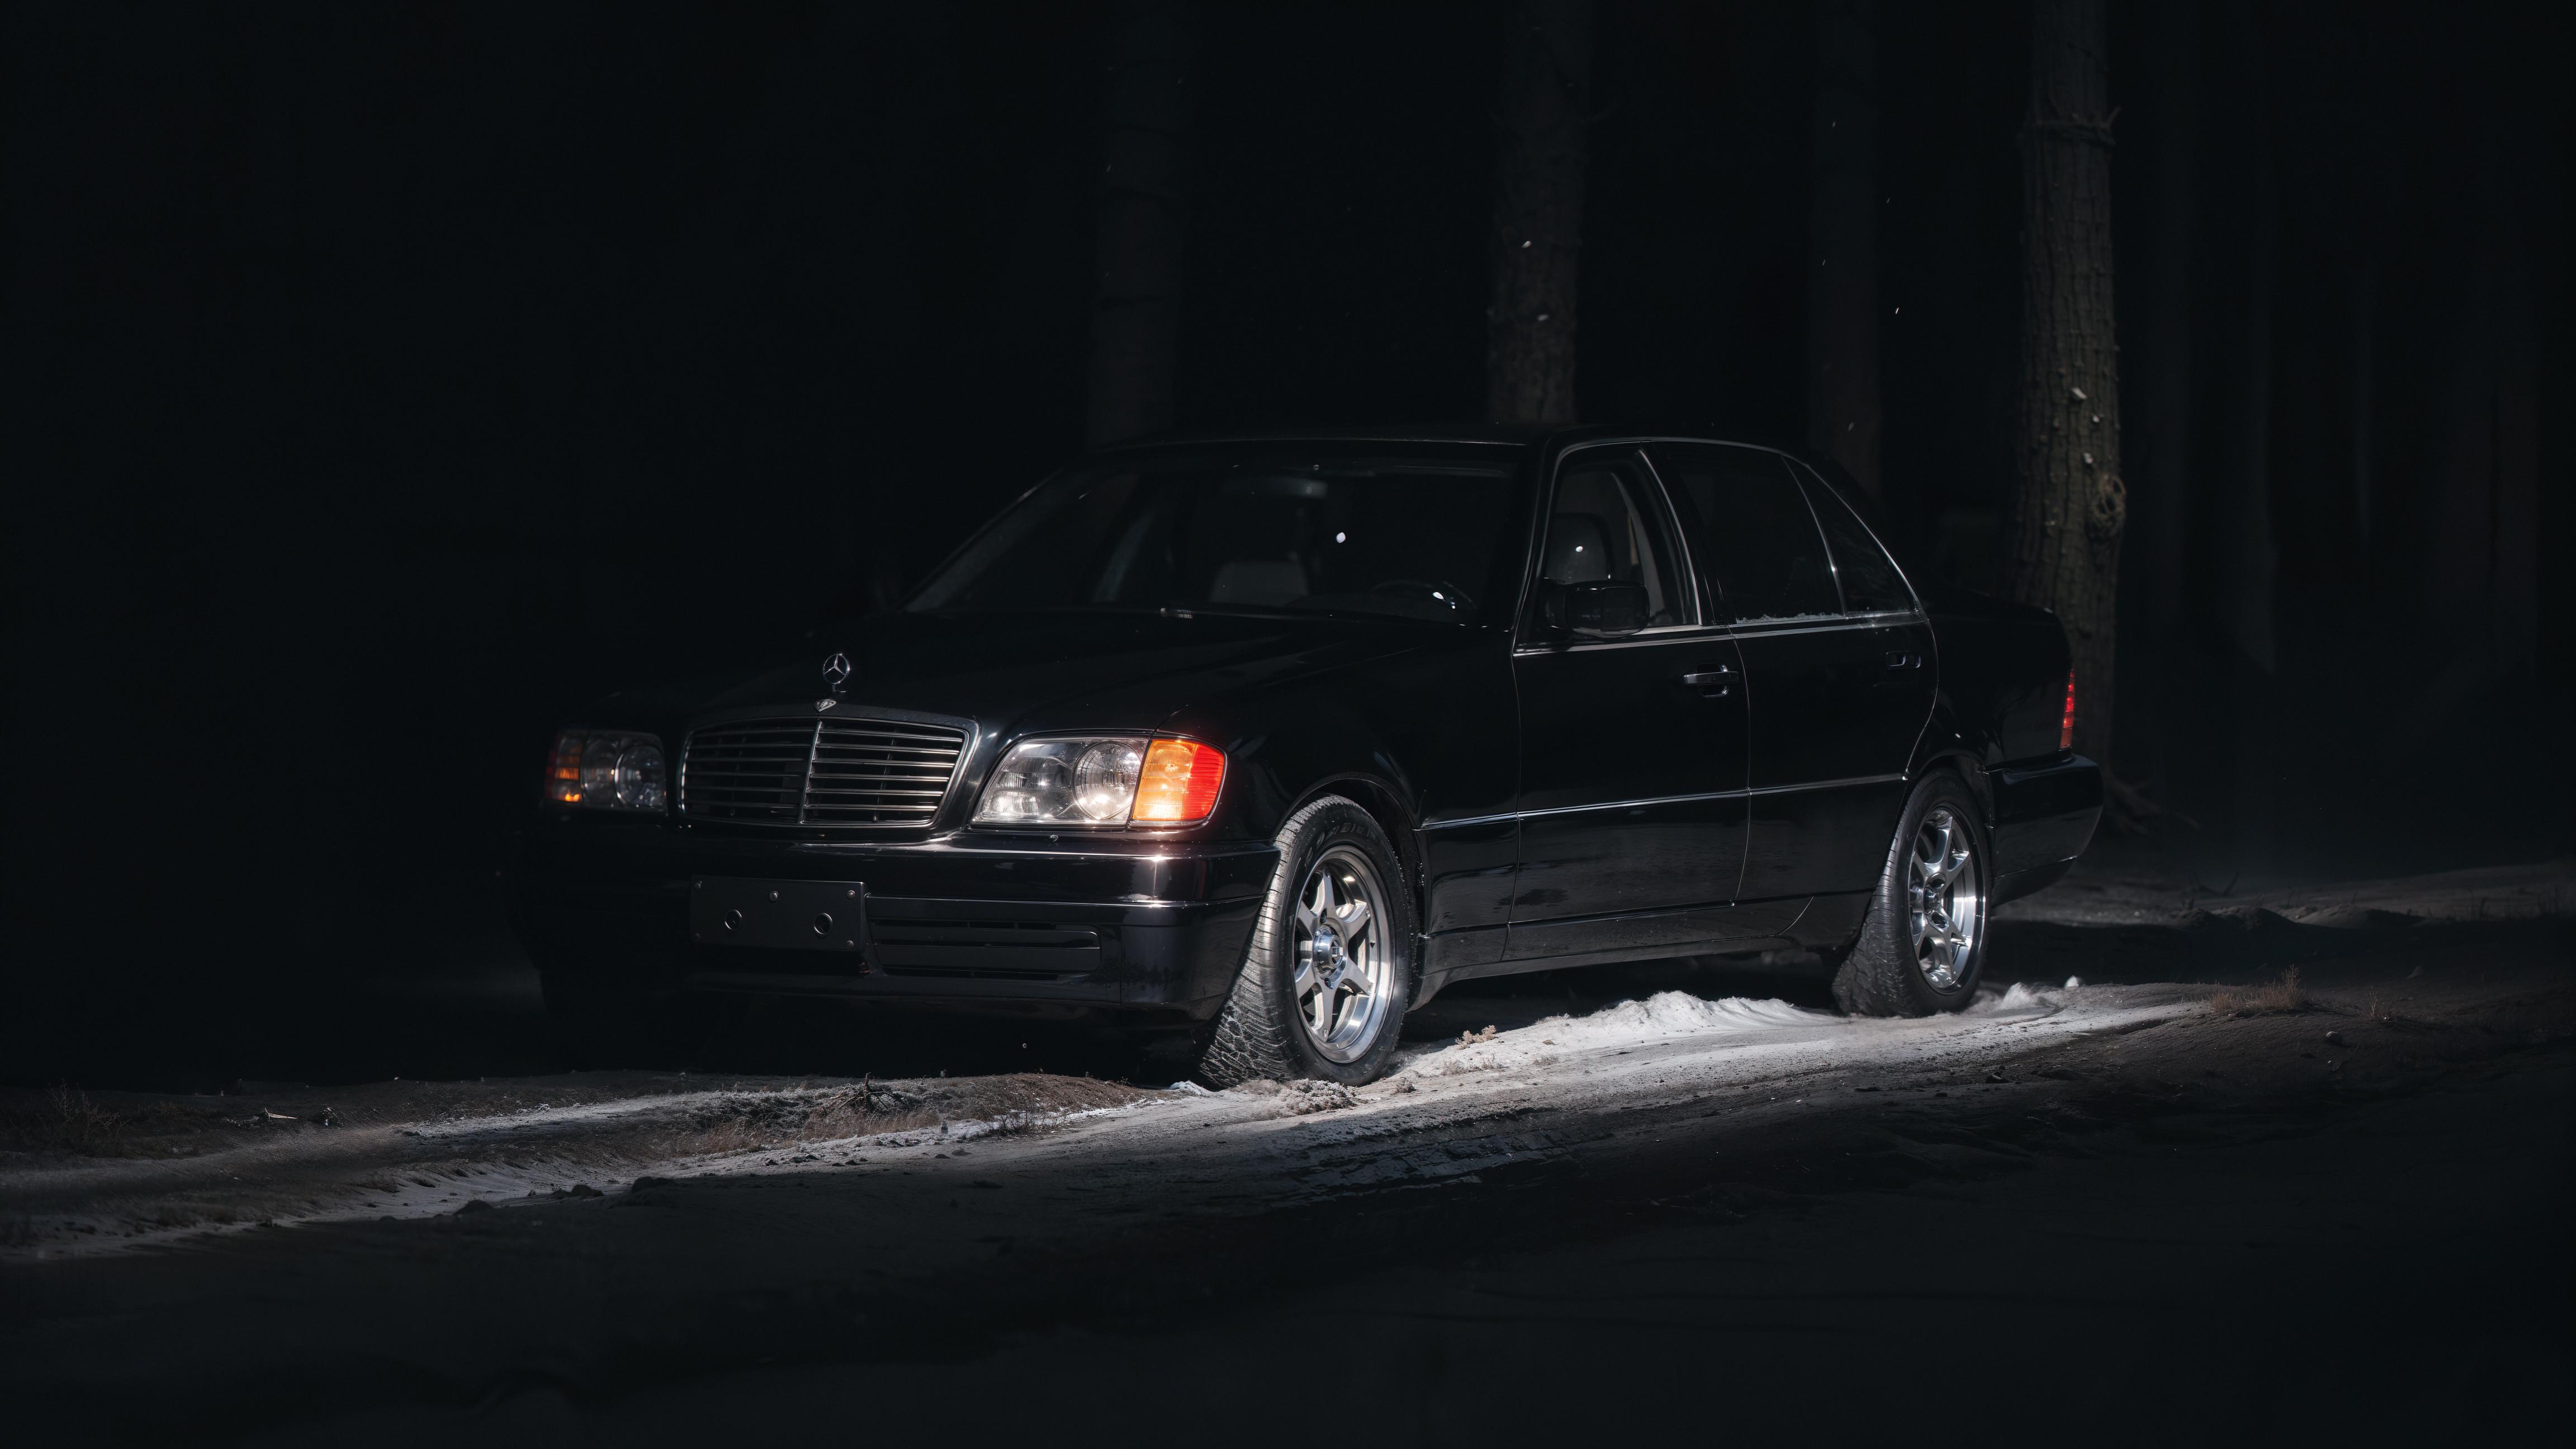 A black car on a dark road with snow on the ground.